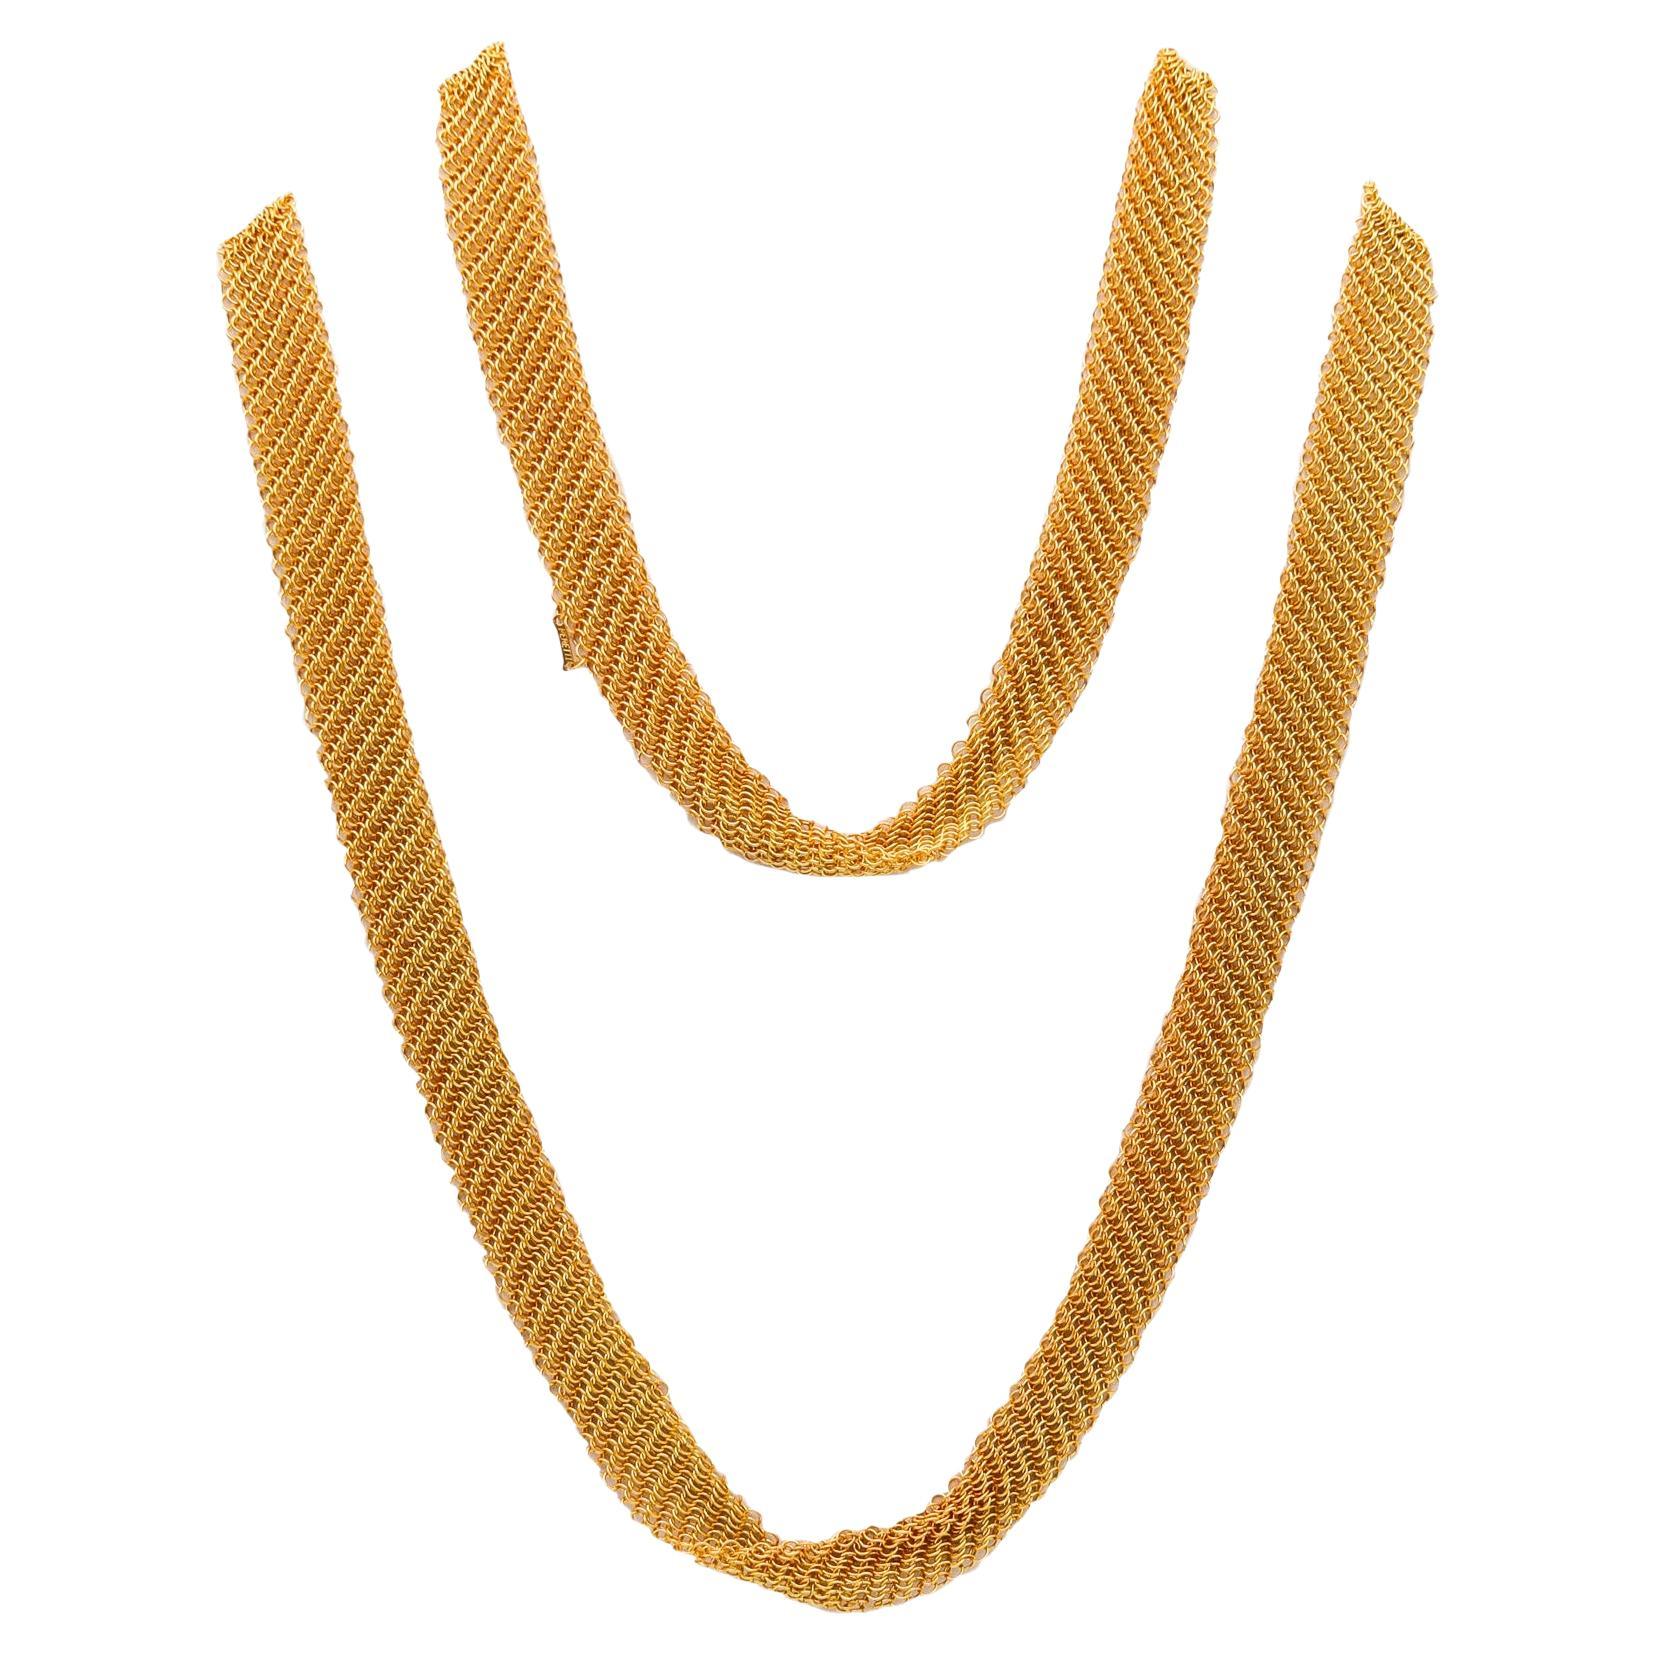 Tiffany & Co. 1982 Elsa Peretti Mesh Long Necklace 18Kt Gold Vermeil On Sterling